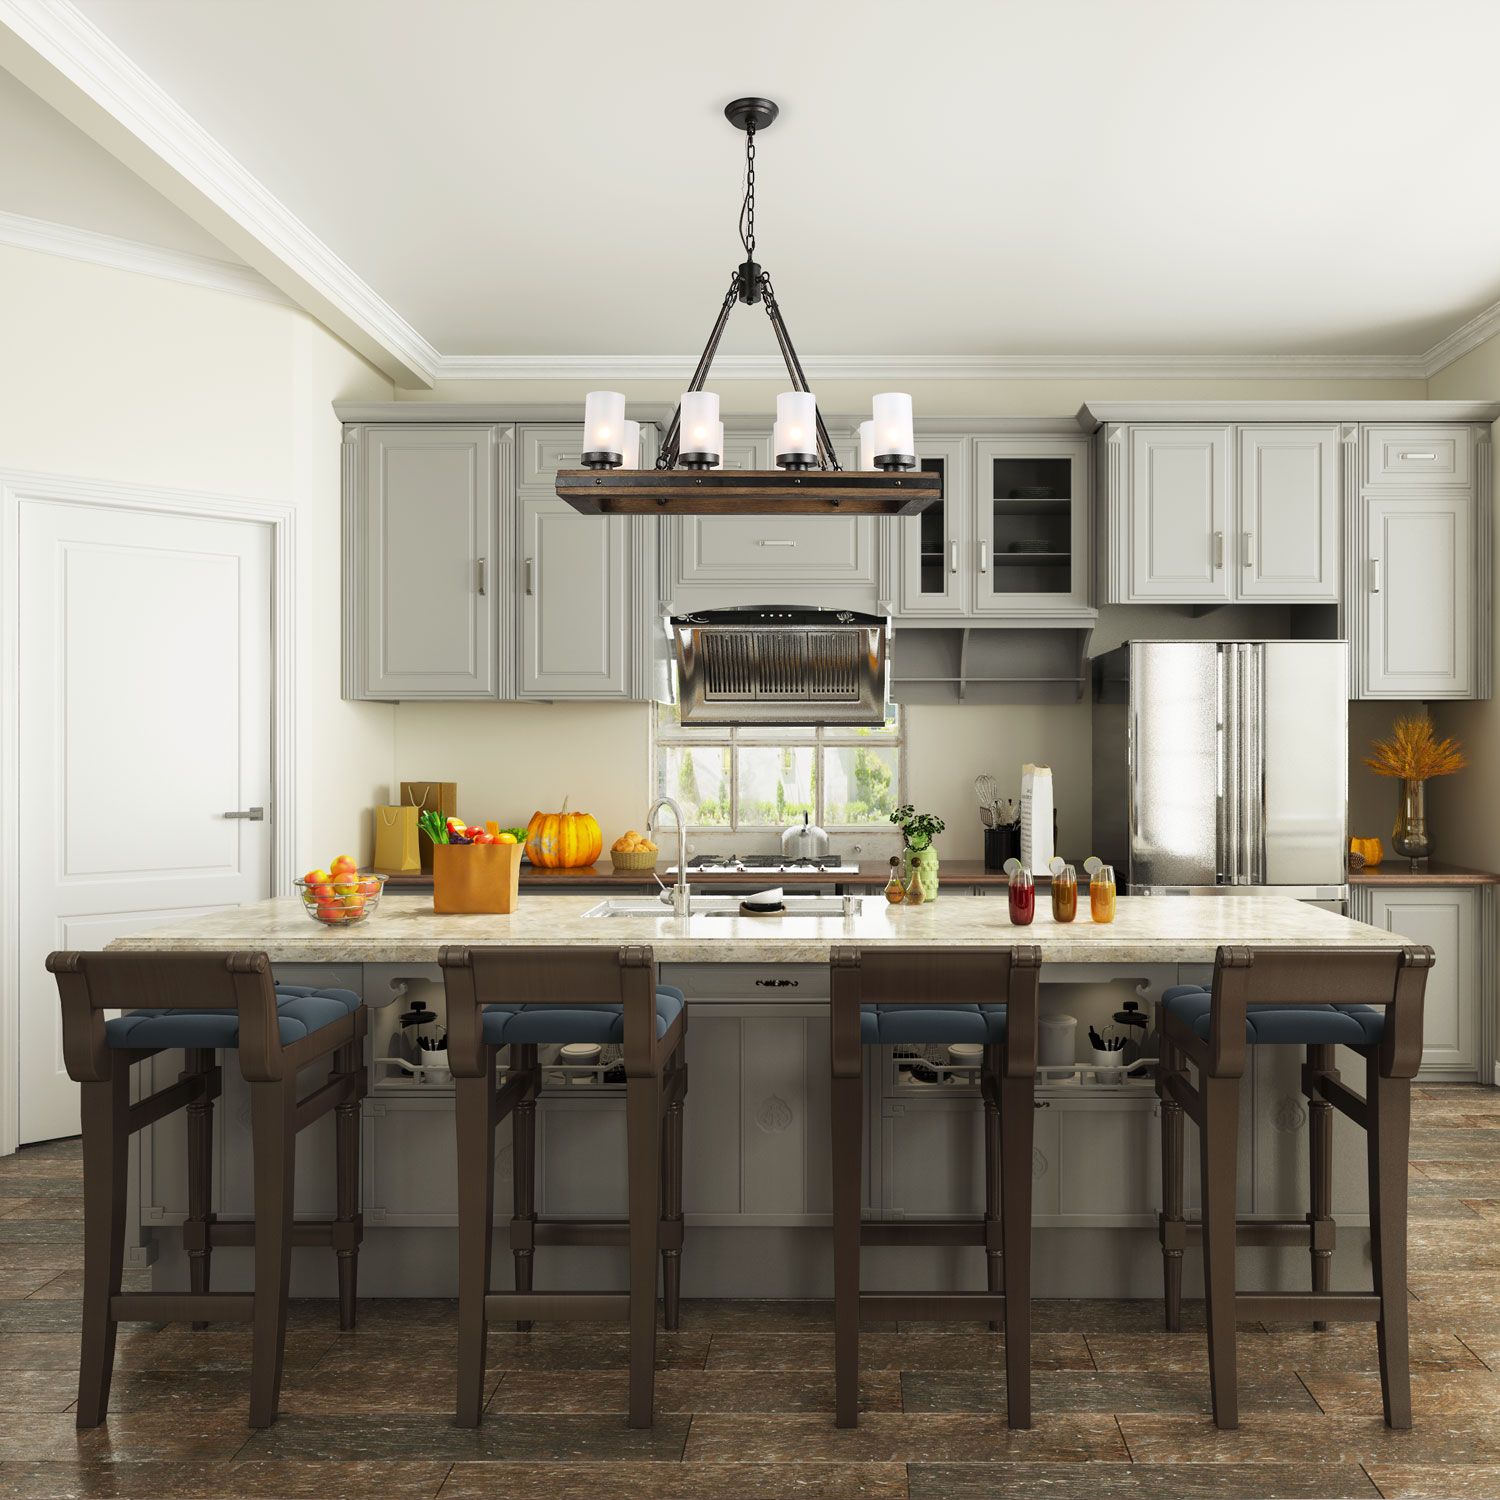 Lnc Kitchen Island Pendant Lights, 8 Lights Rustic In Kitchen Island Light Chandeliers (View 3 of 15)